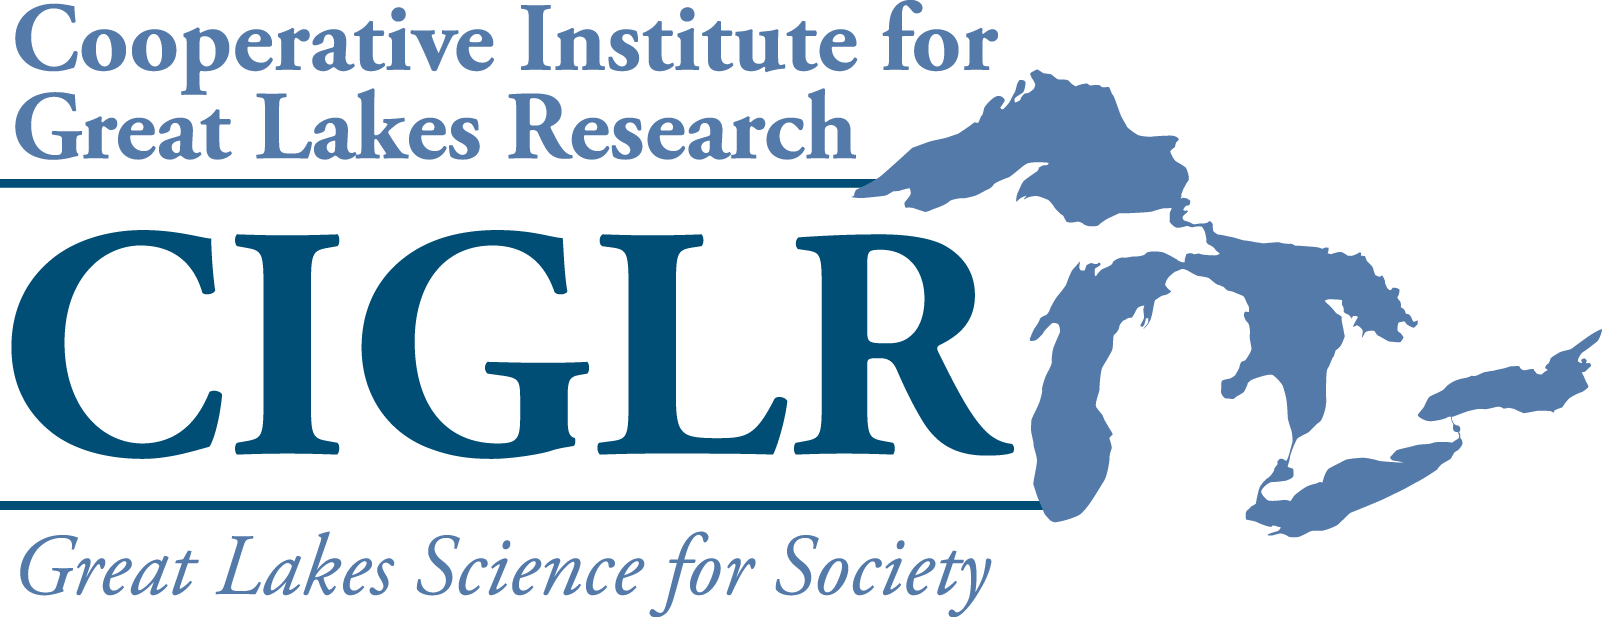 Go to the Cooperative Institute for Great Lakes Research home page